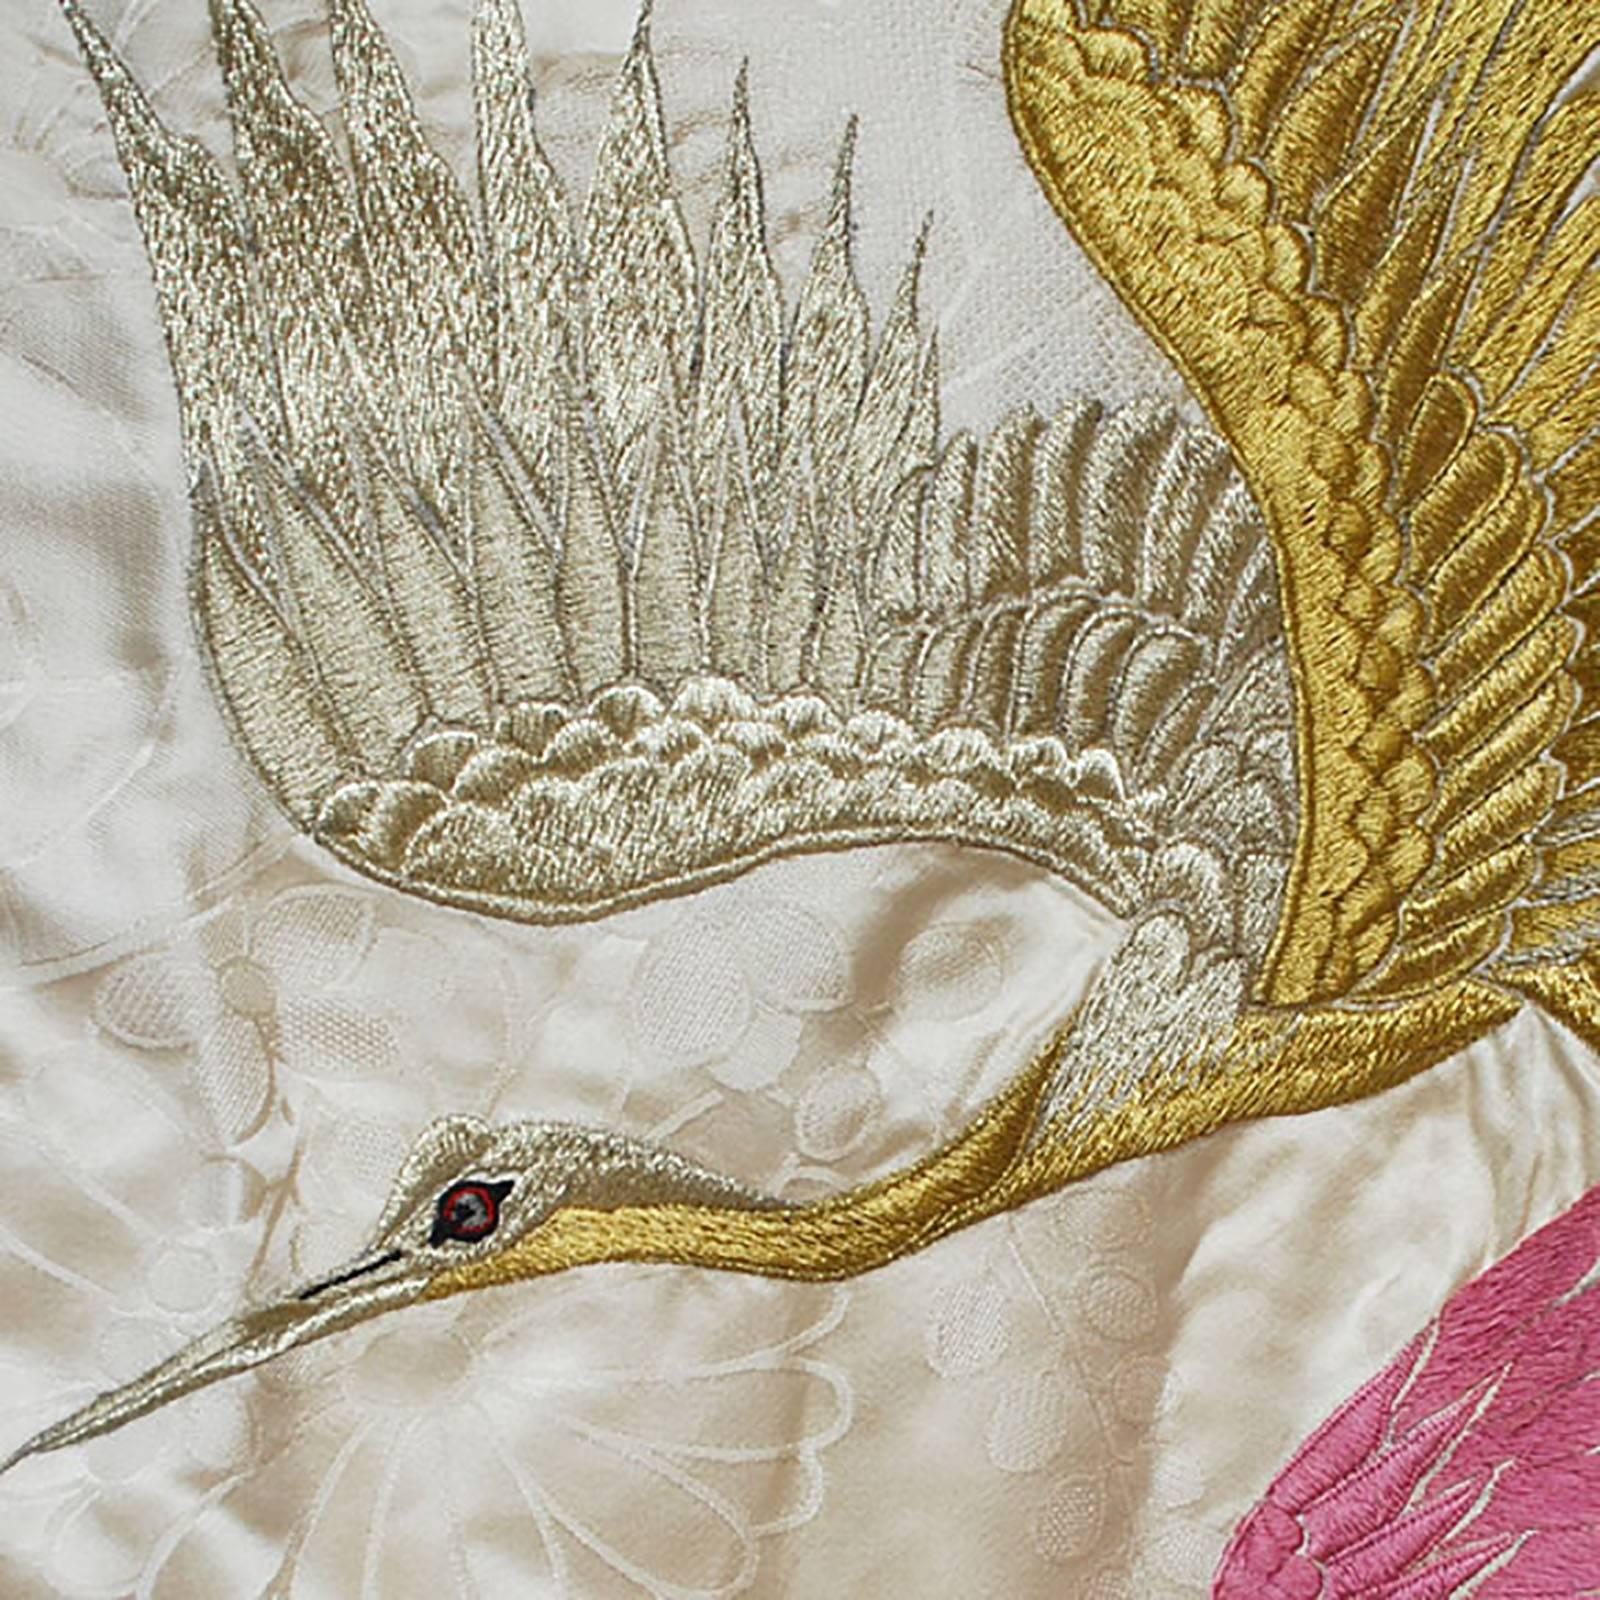 A rare find, this embroidered wedding robe (called a uchikake) was worn by a Japanese bride over 80 years ago, and is a testament to hours of patience and work. With each careful stitch, the beautifully vibrant plum and lime colored cranes become a